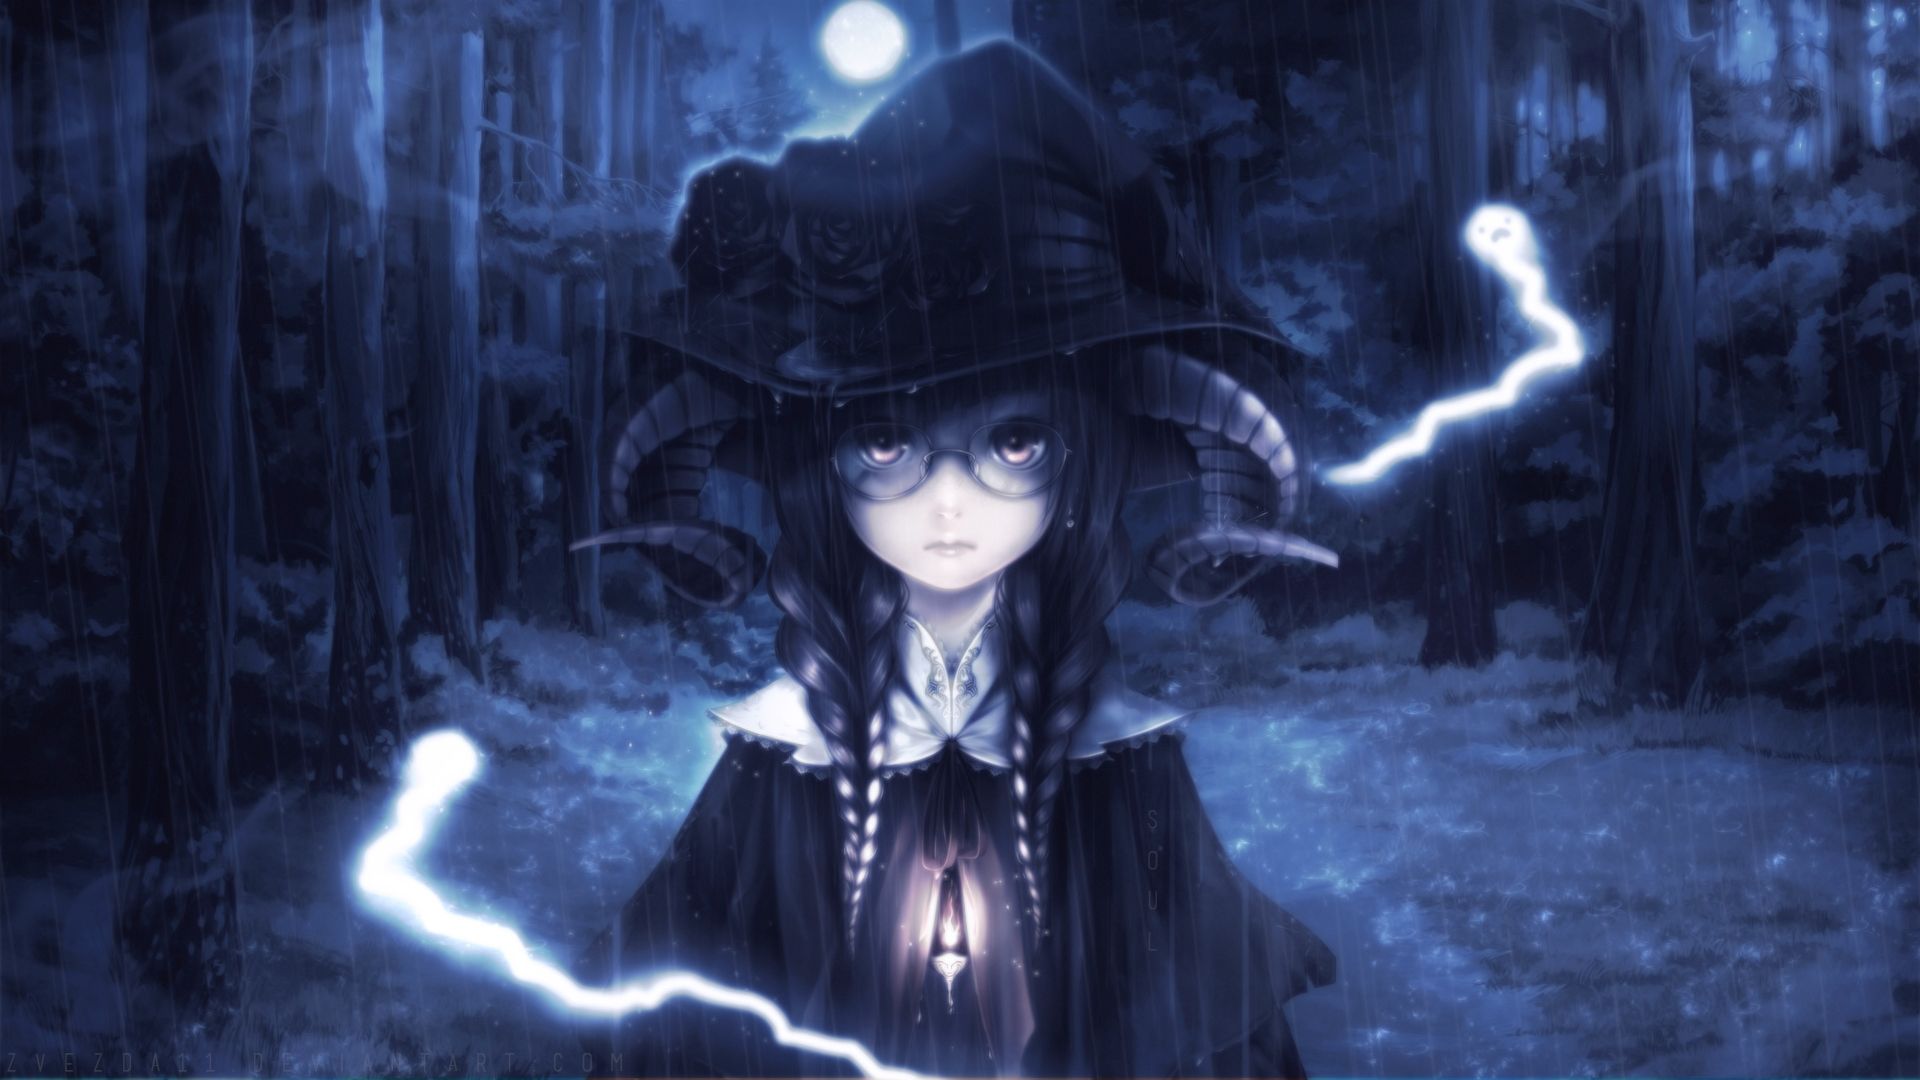 Download 1920x1080 Anime Girl, Horns, Forest, Ghostd, Witch, Glasses, Moon Wallpaper for Widescreen